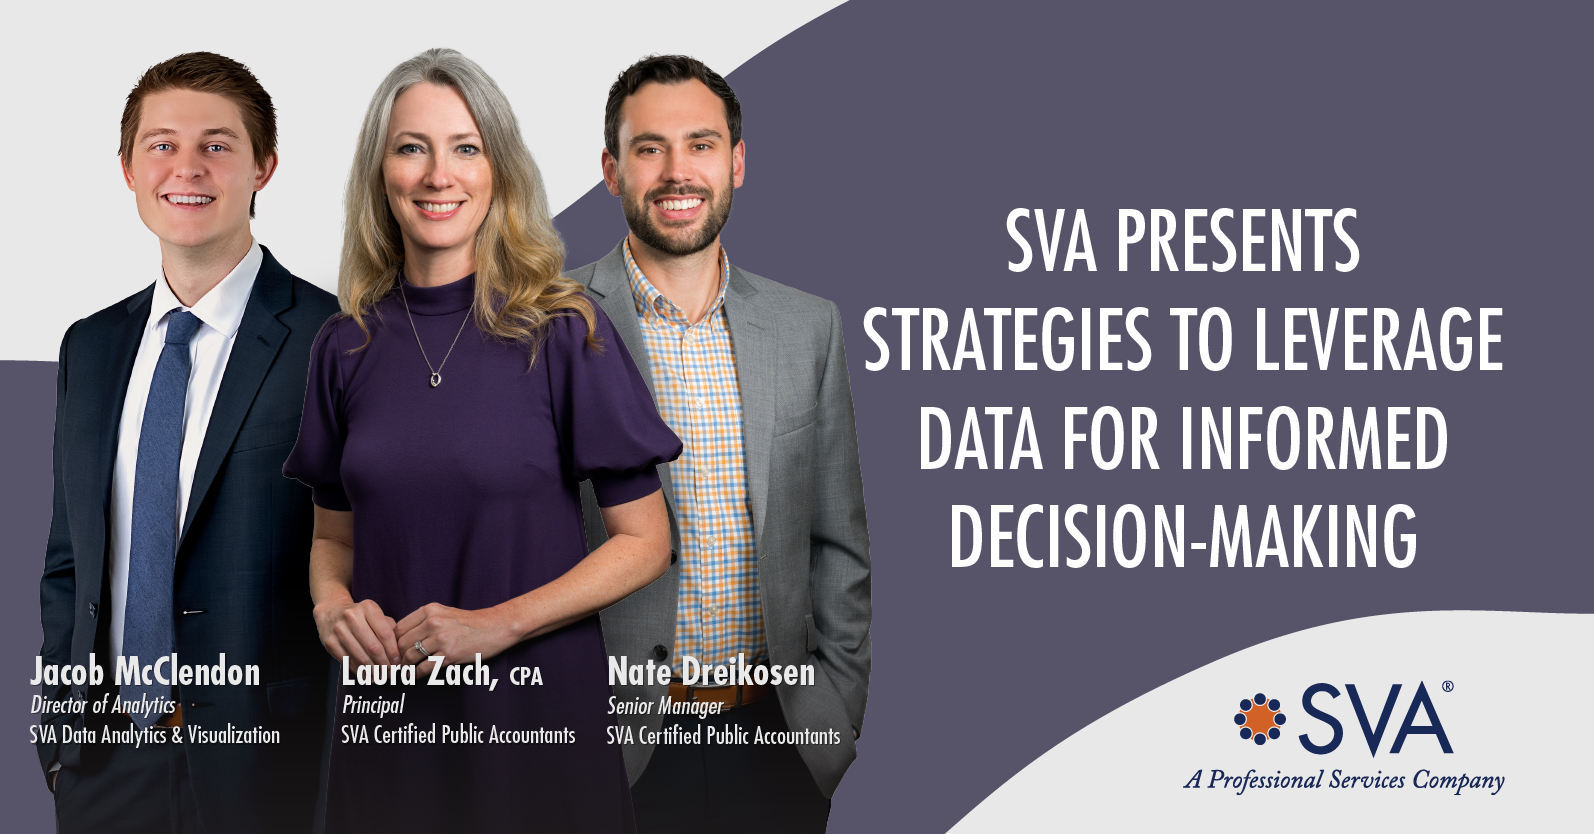 SVA Presents Strategies to Leverage Data for Informed Decision-Making  